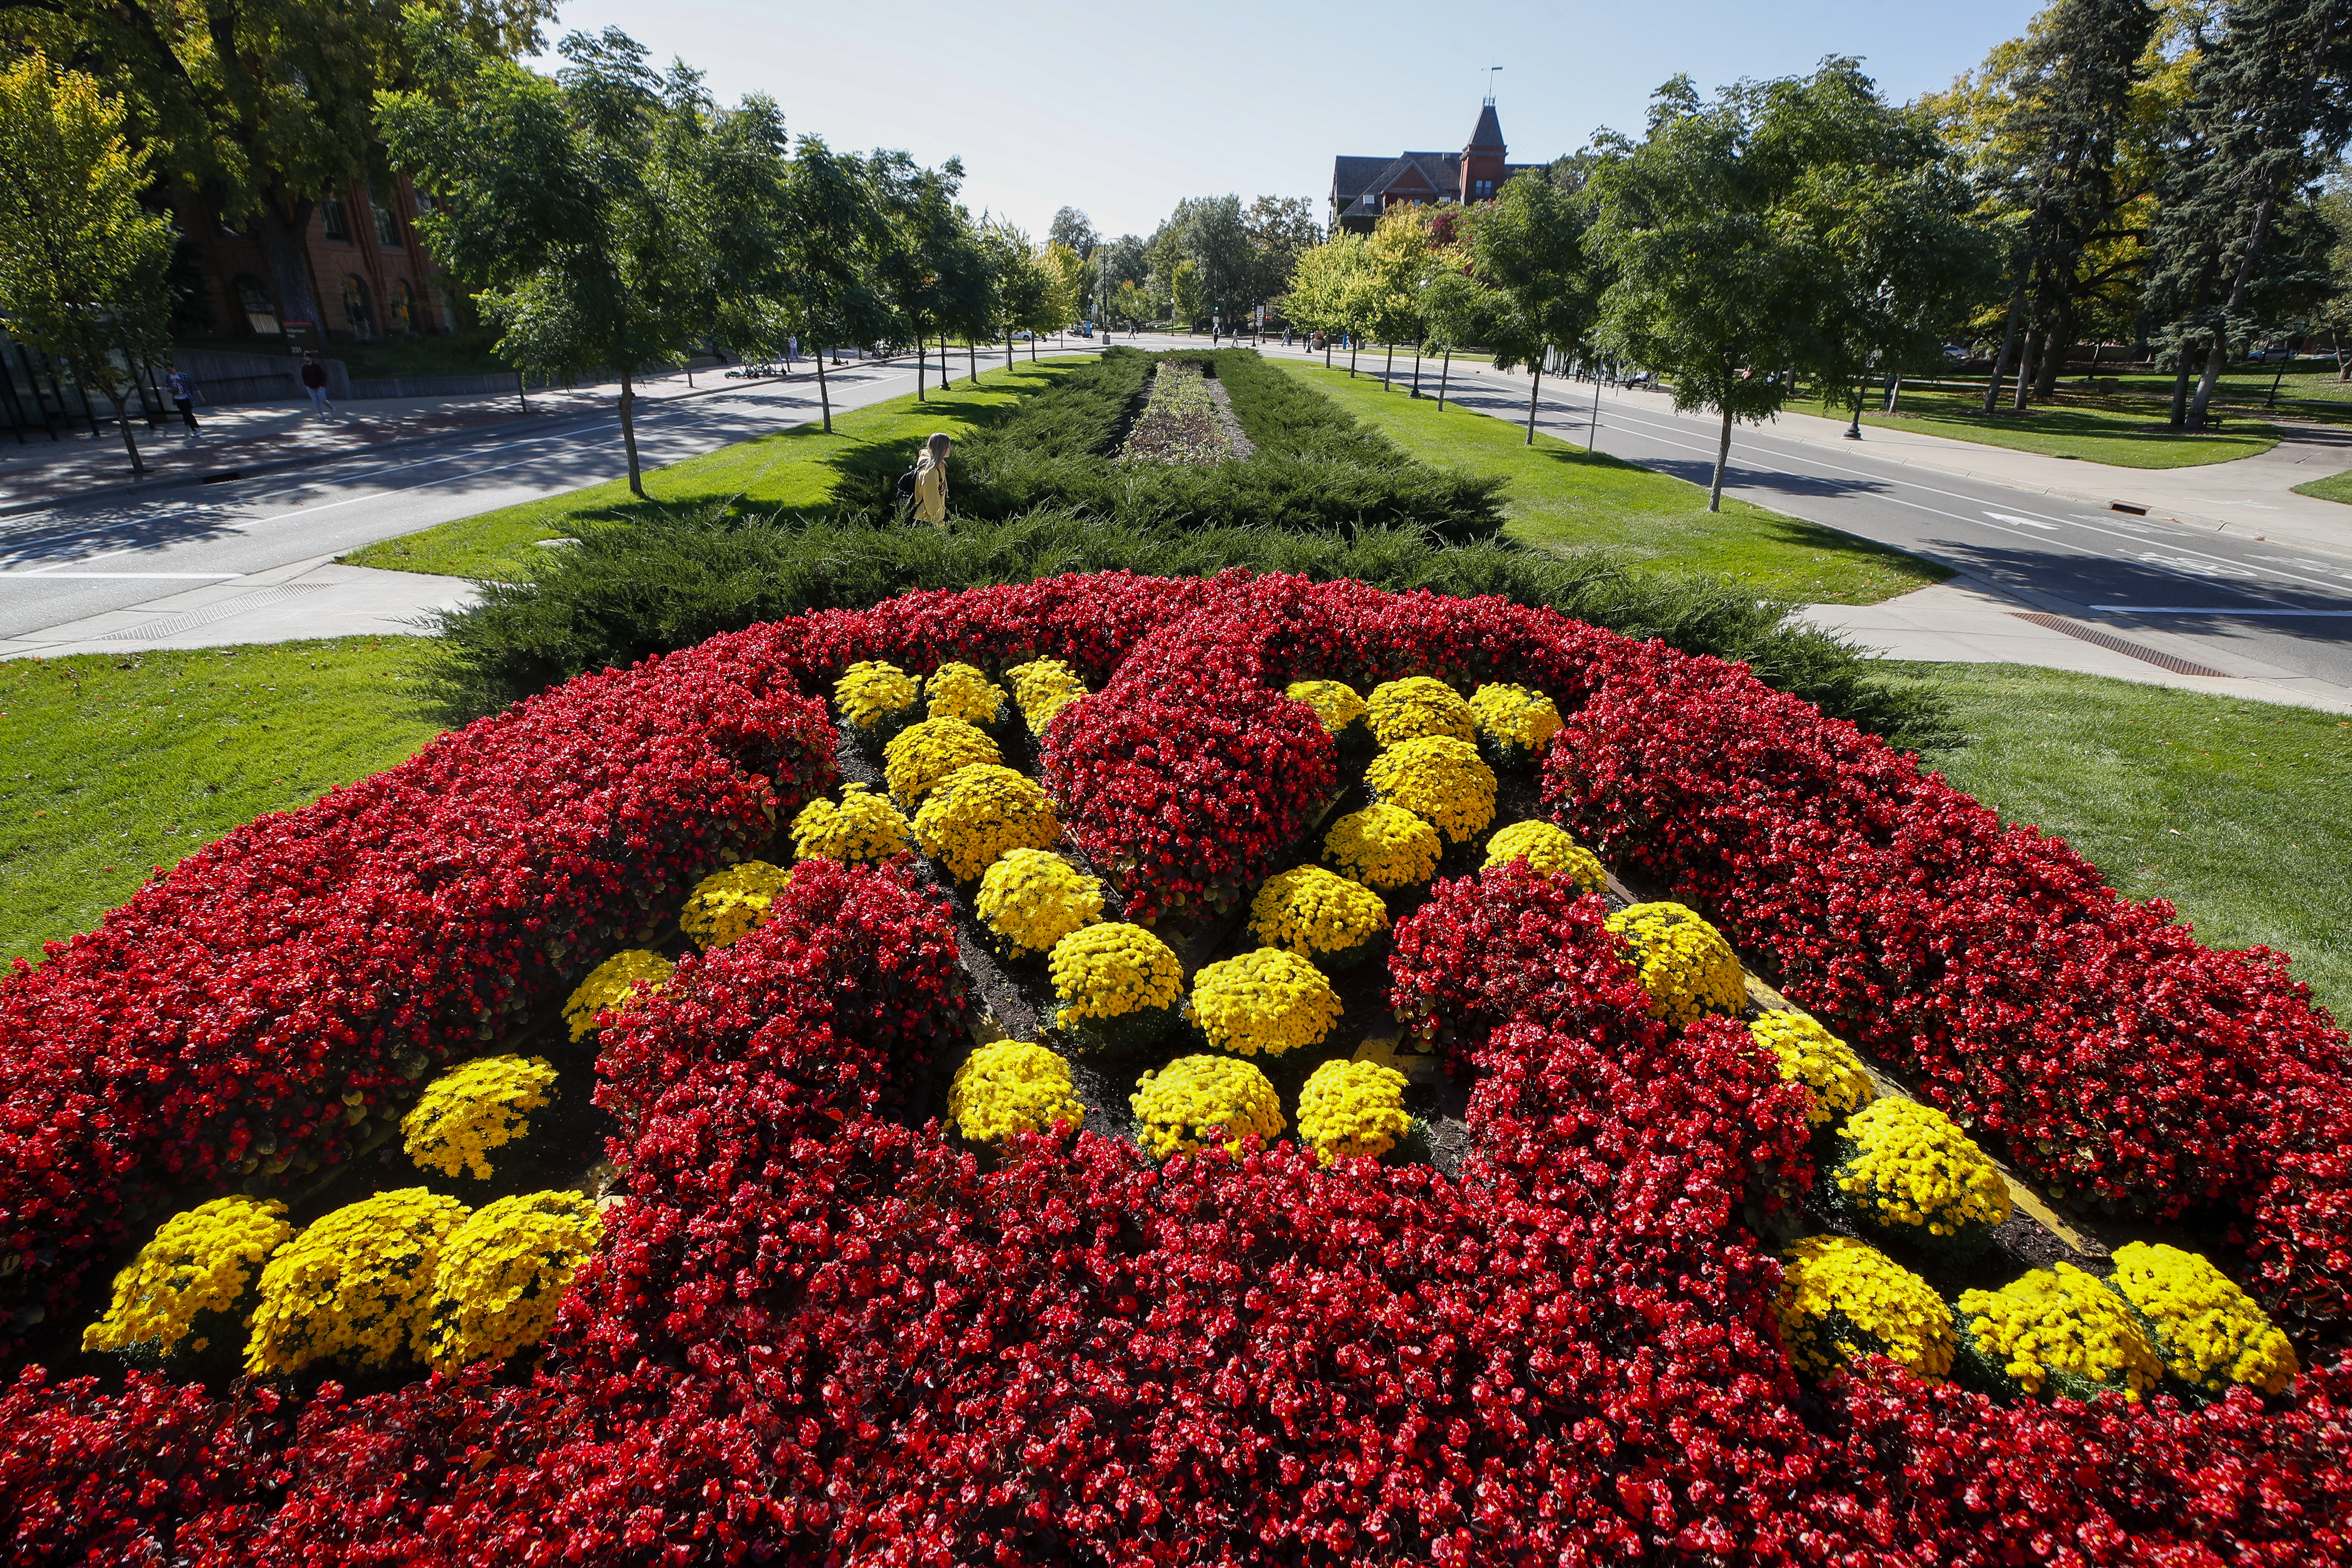 University of Minnesota "M" symbol represented in a garden of maroon & yellow flowers.